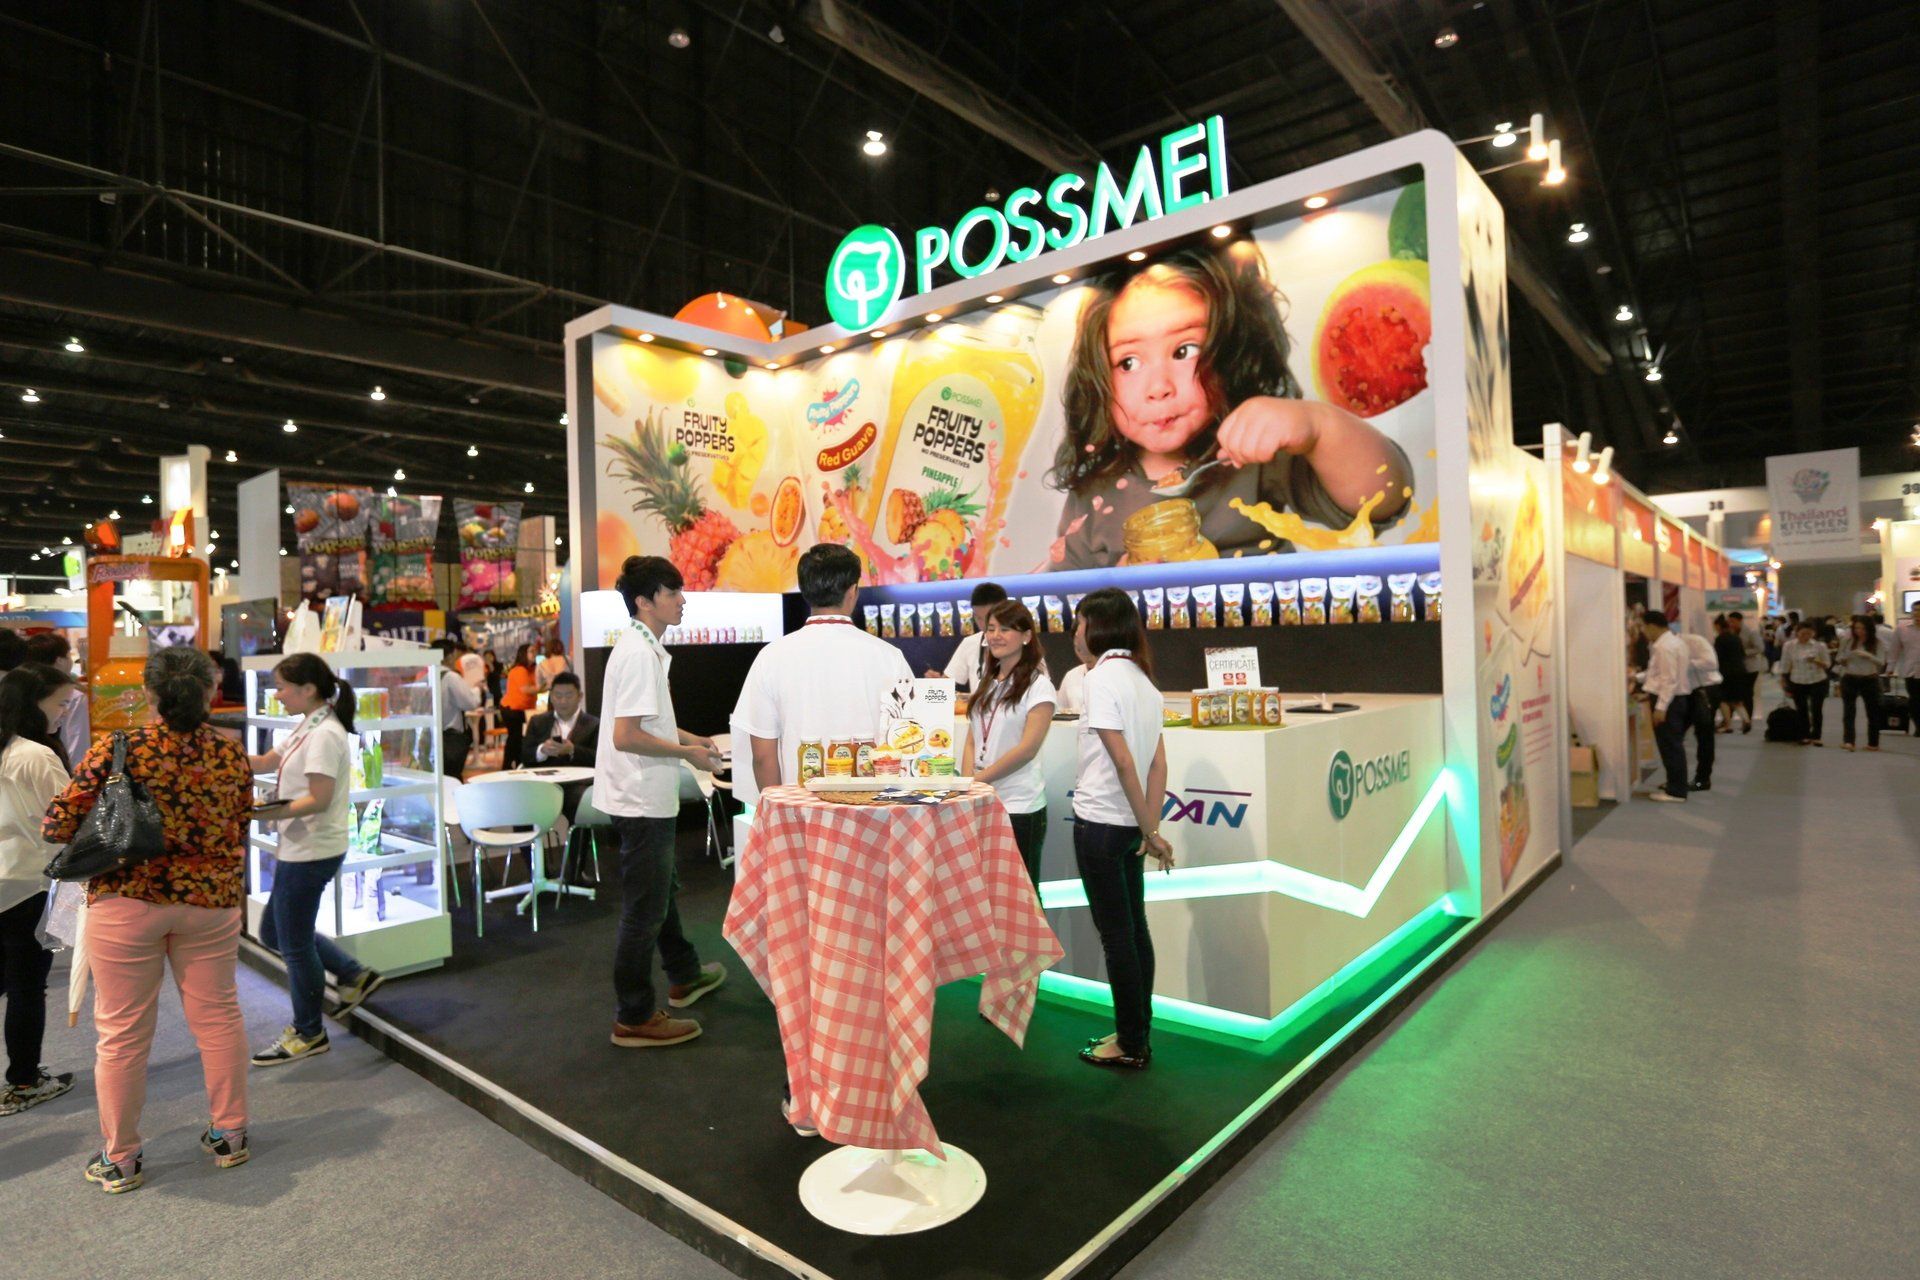 Possmei International @ Thaifex 2014. Booth designed and built by Essential Global Fairs.